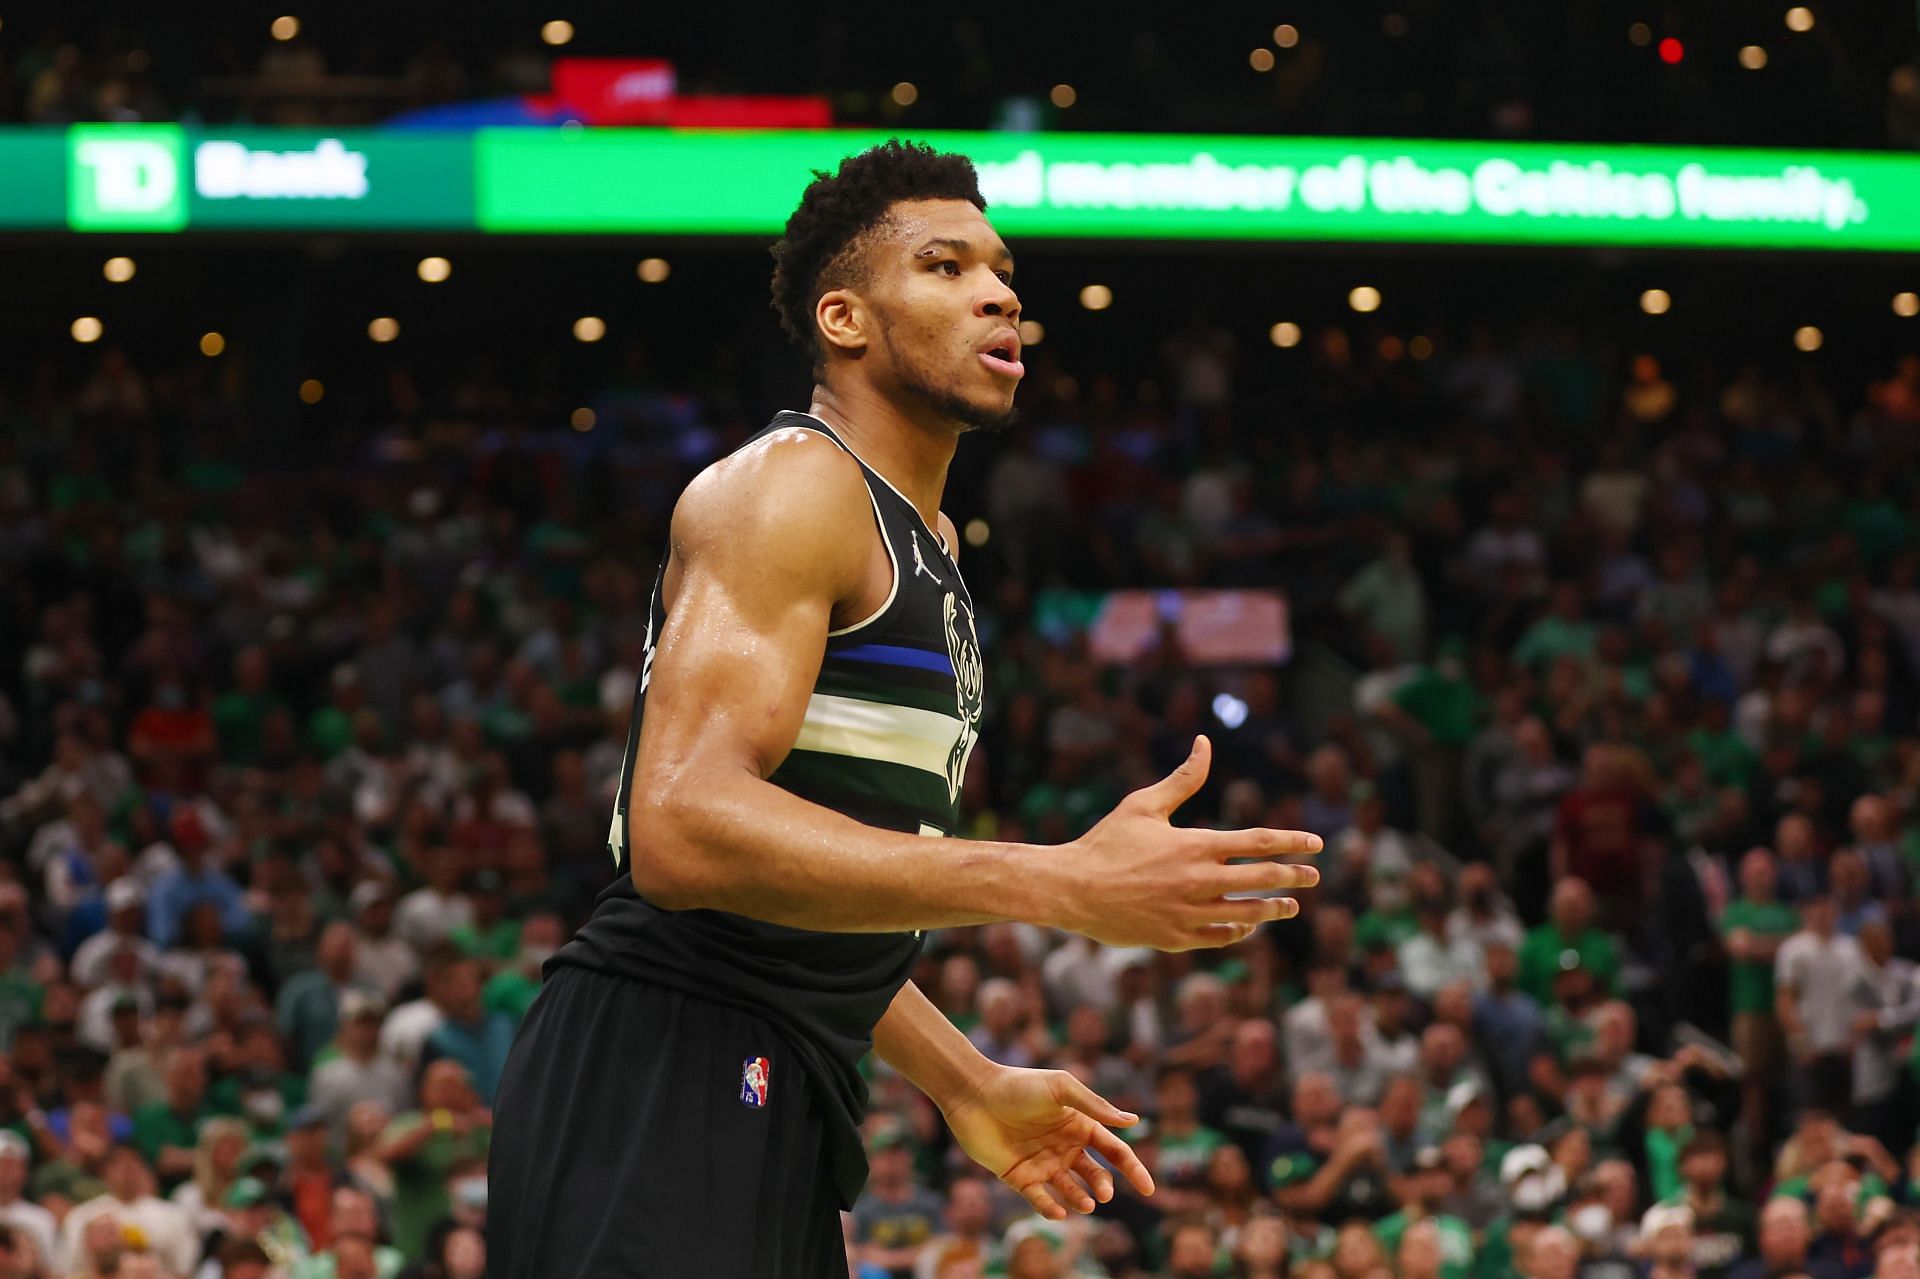 According to Colin Cowherd, Giannis Antetokounmpo is ahead of Rasheed Wallace in all the intangibles.